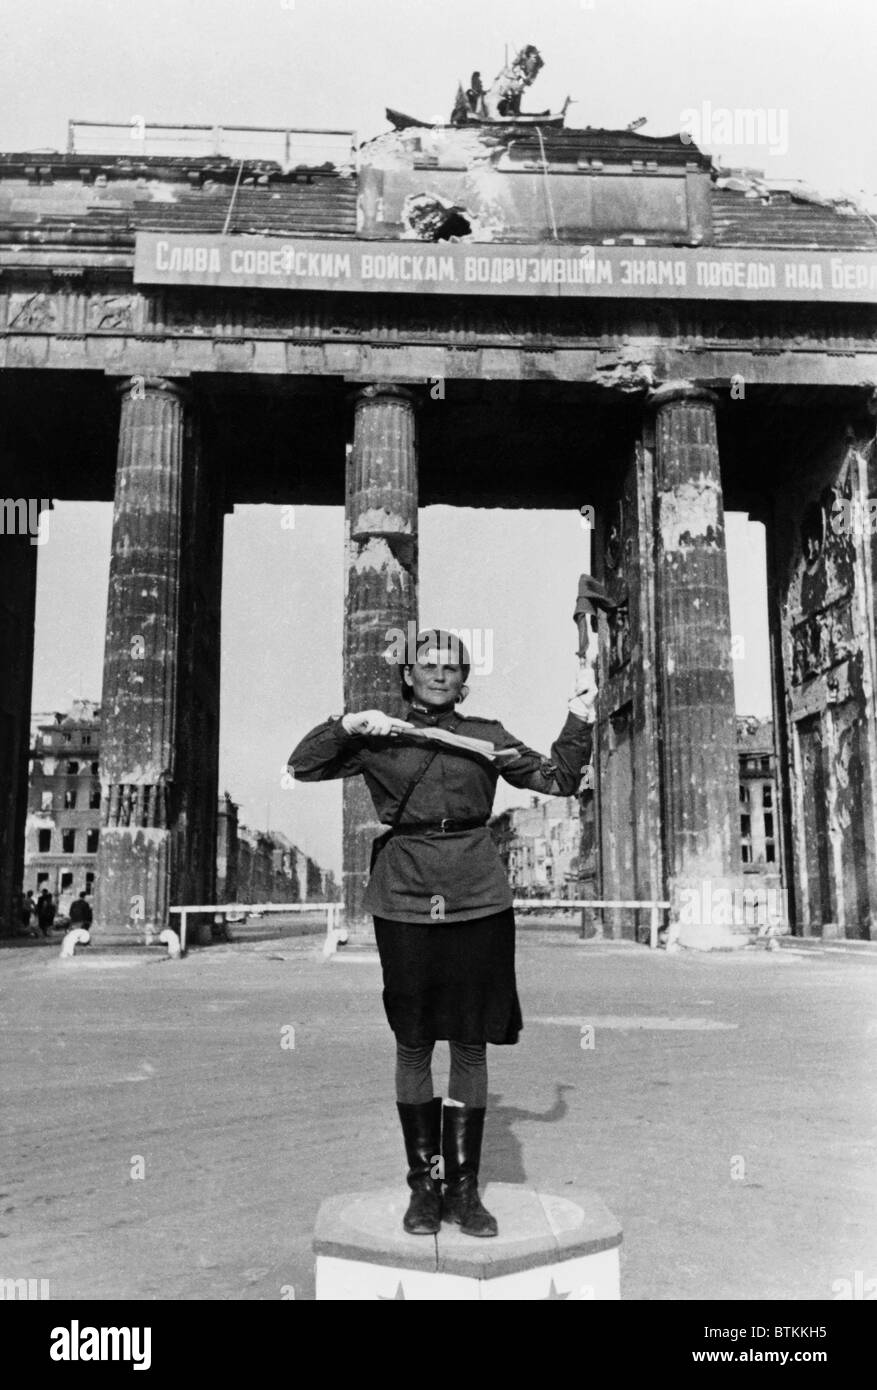 Soviet military police woman directing traffic at the Brandenburg Gate, in the Soviet Sector of divided Berlin, after the Nazi's surrendered in 1945. Photo by Evgenii Khaldei, famed Red Army photographer. Stock Photo